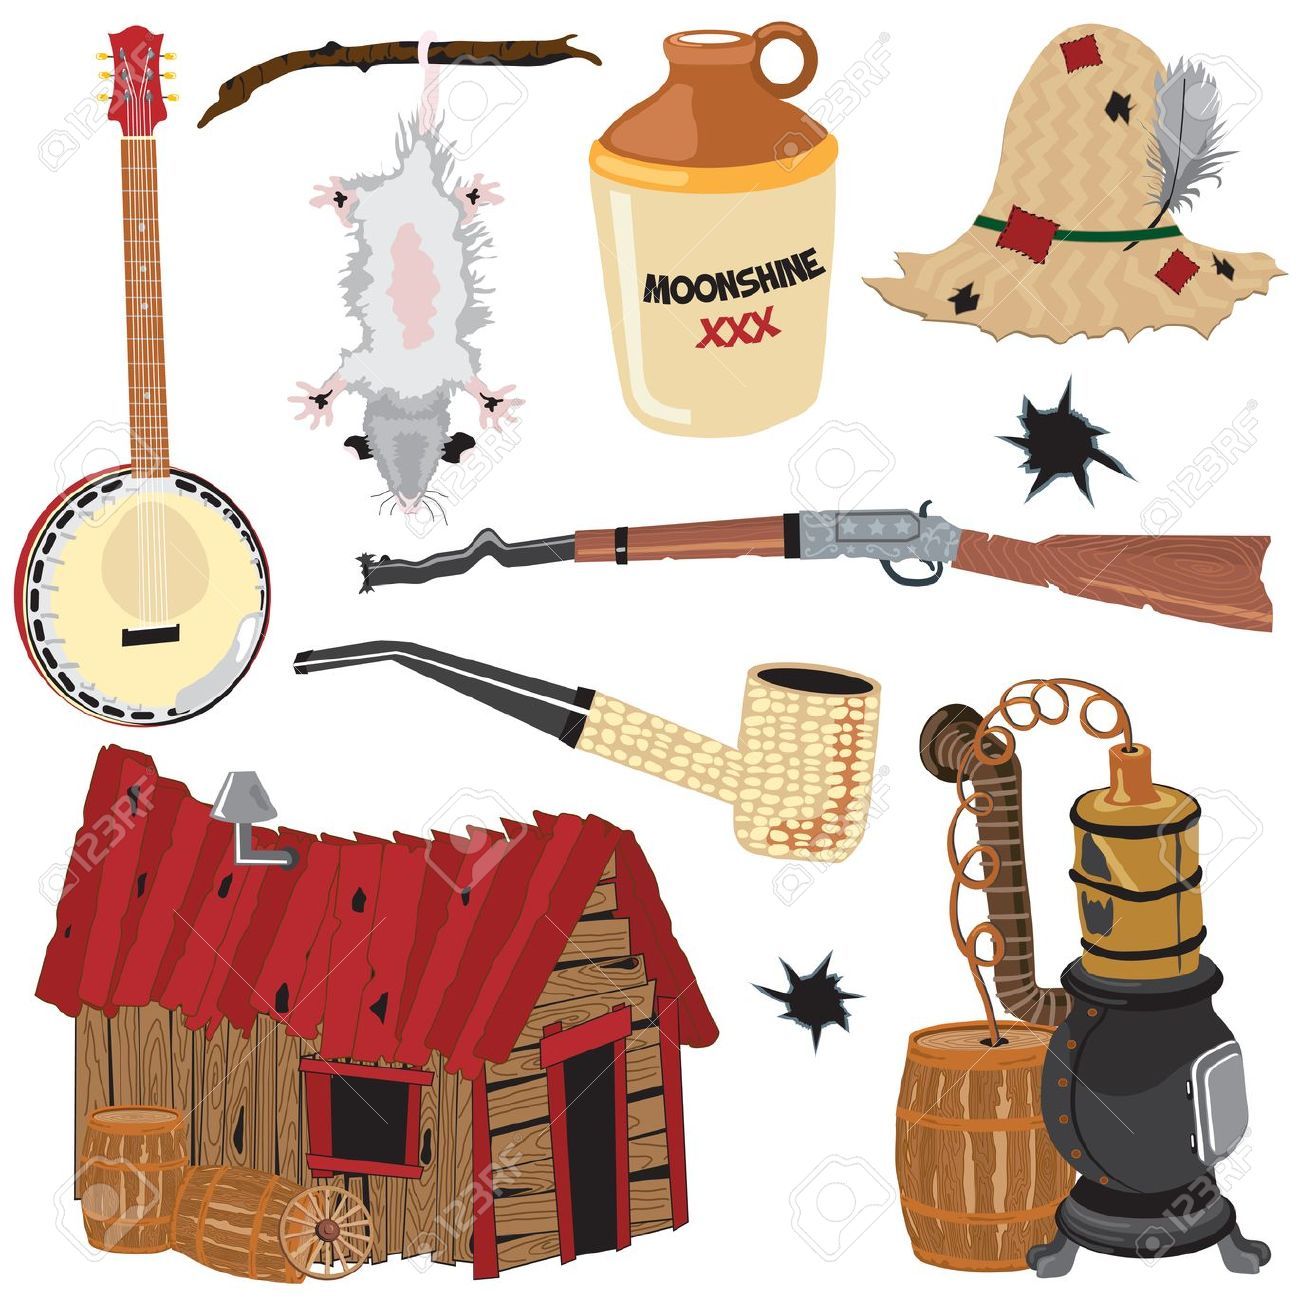 Animated hillbilly bar clipart clipart images gallery for.